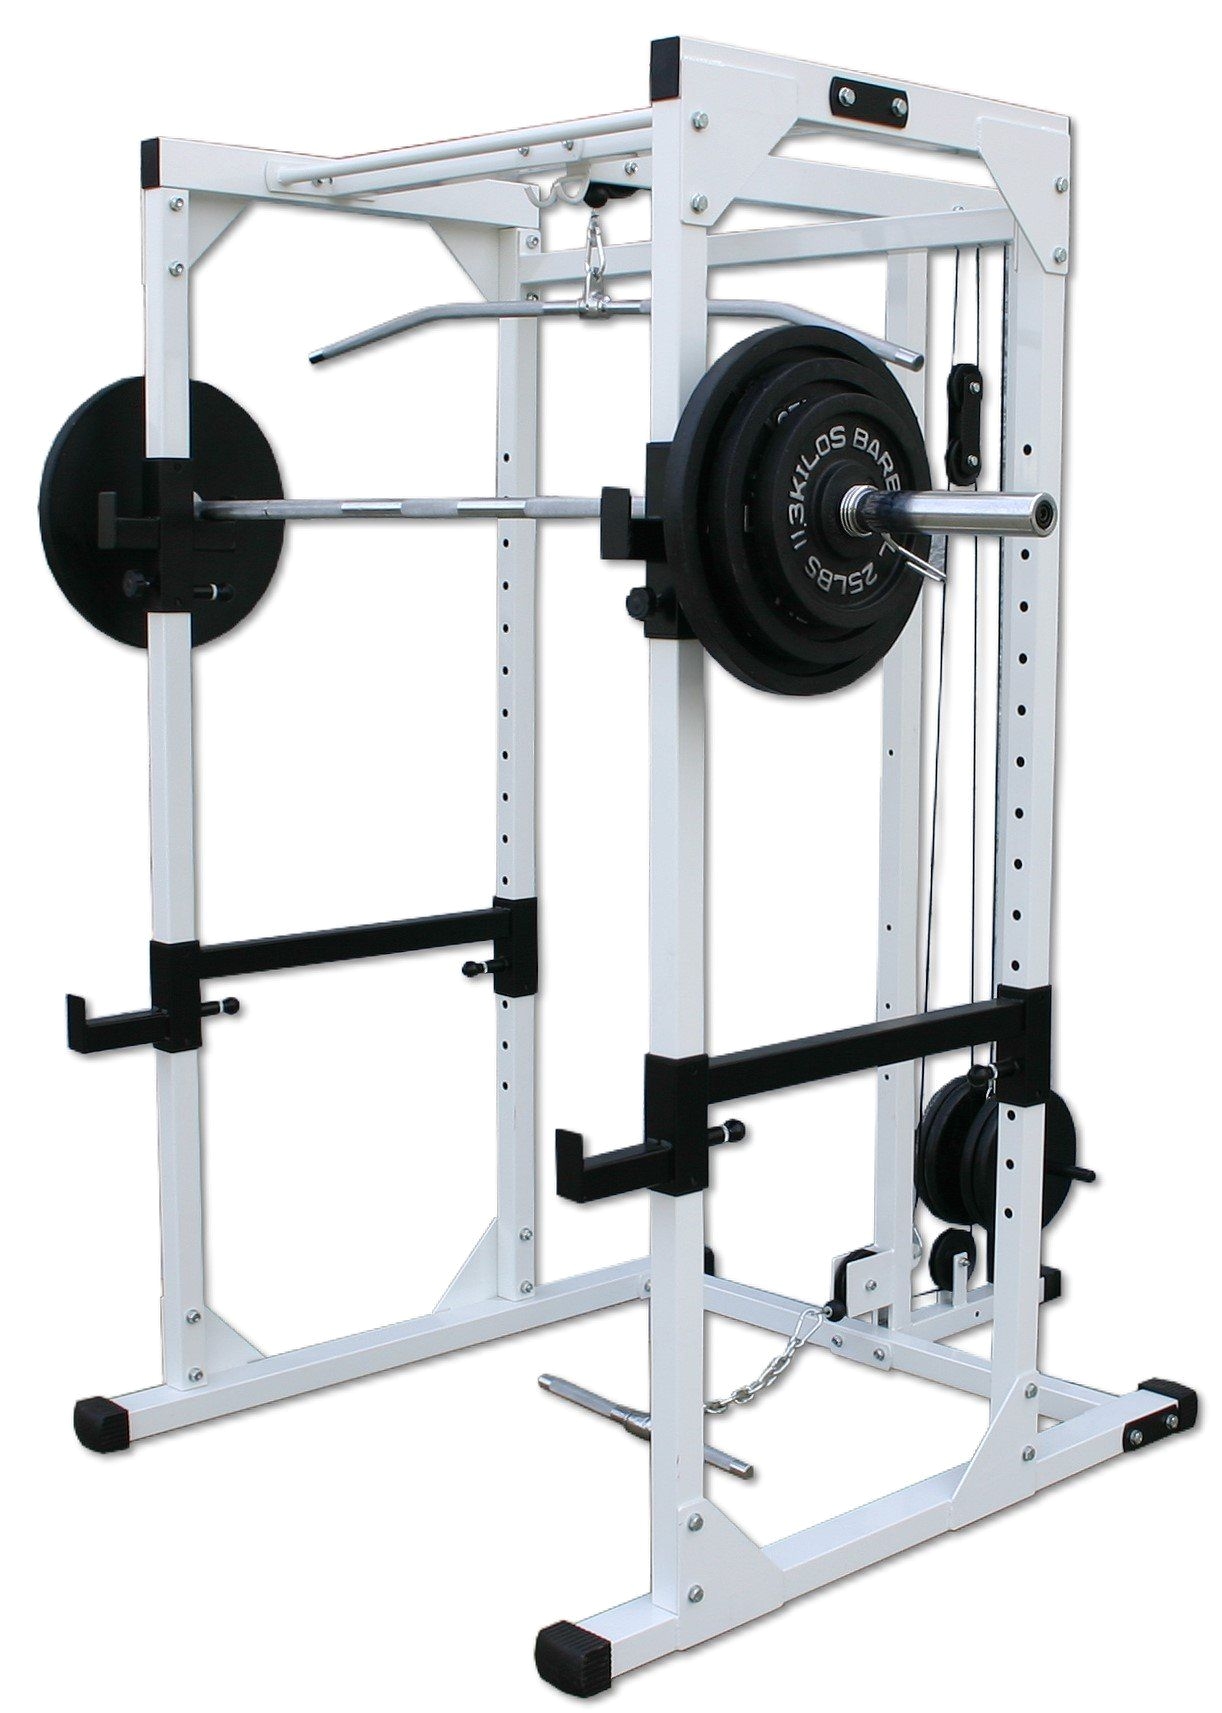 deltech fitness power rack with lat attachment holes on 3 centers easy pull pin adjustment comes with lat bar and row bar power rack has chin up bar